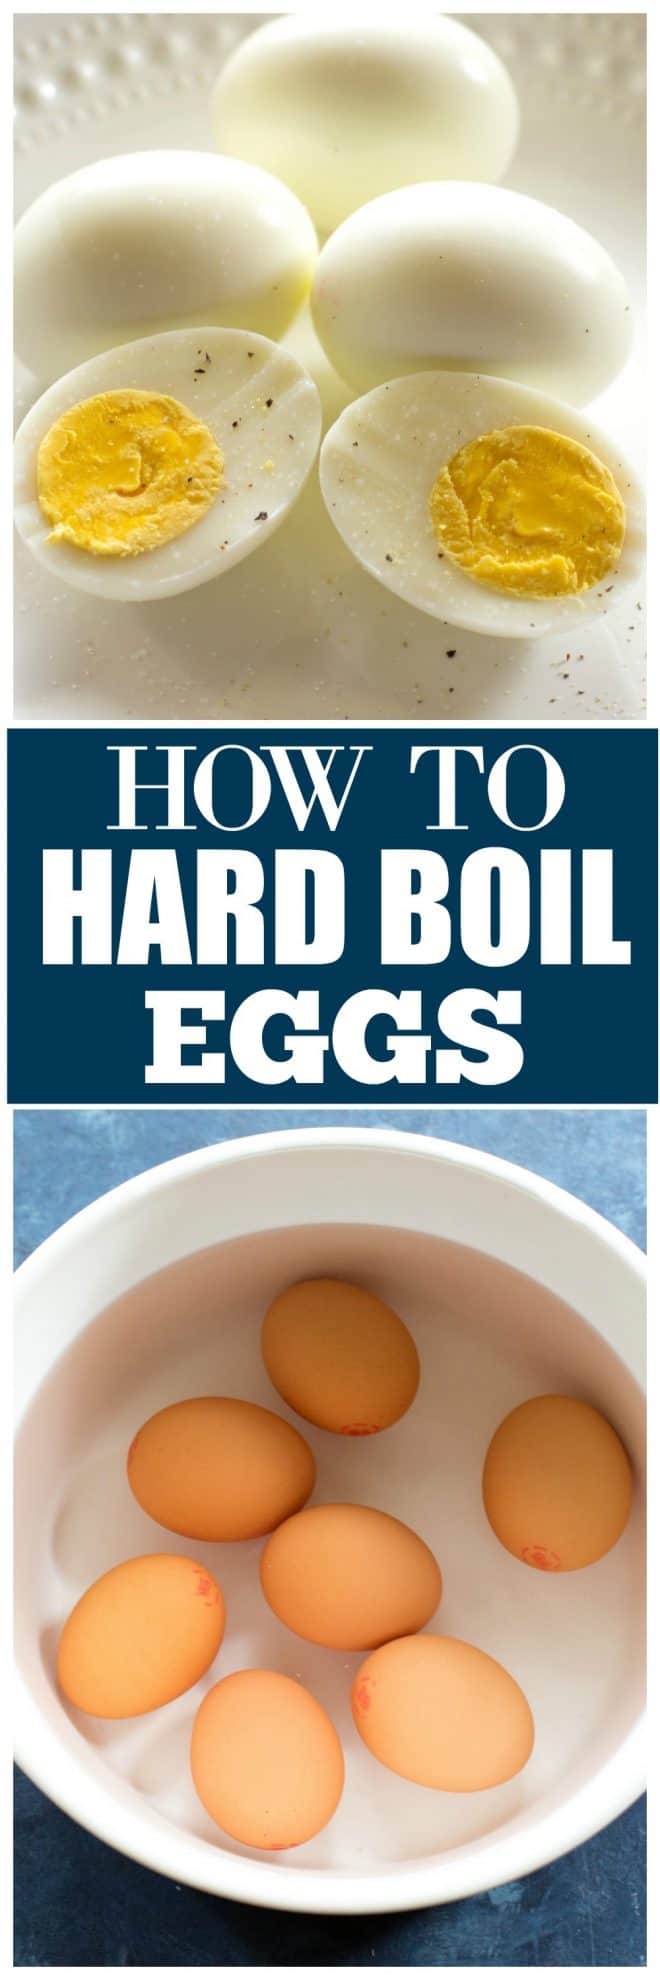 How to Make Perfect Hard Boiled Eggs - The Girl Who Ate Everything